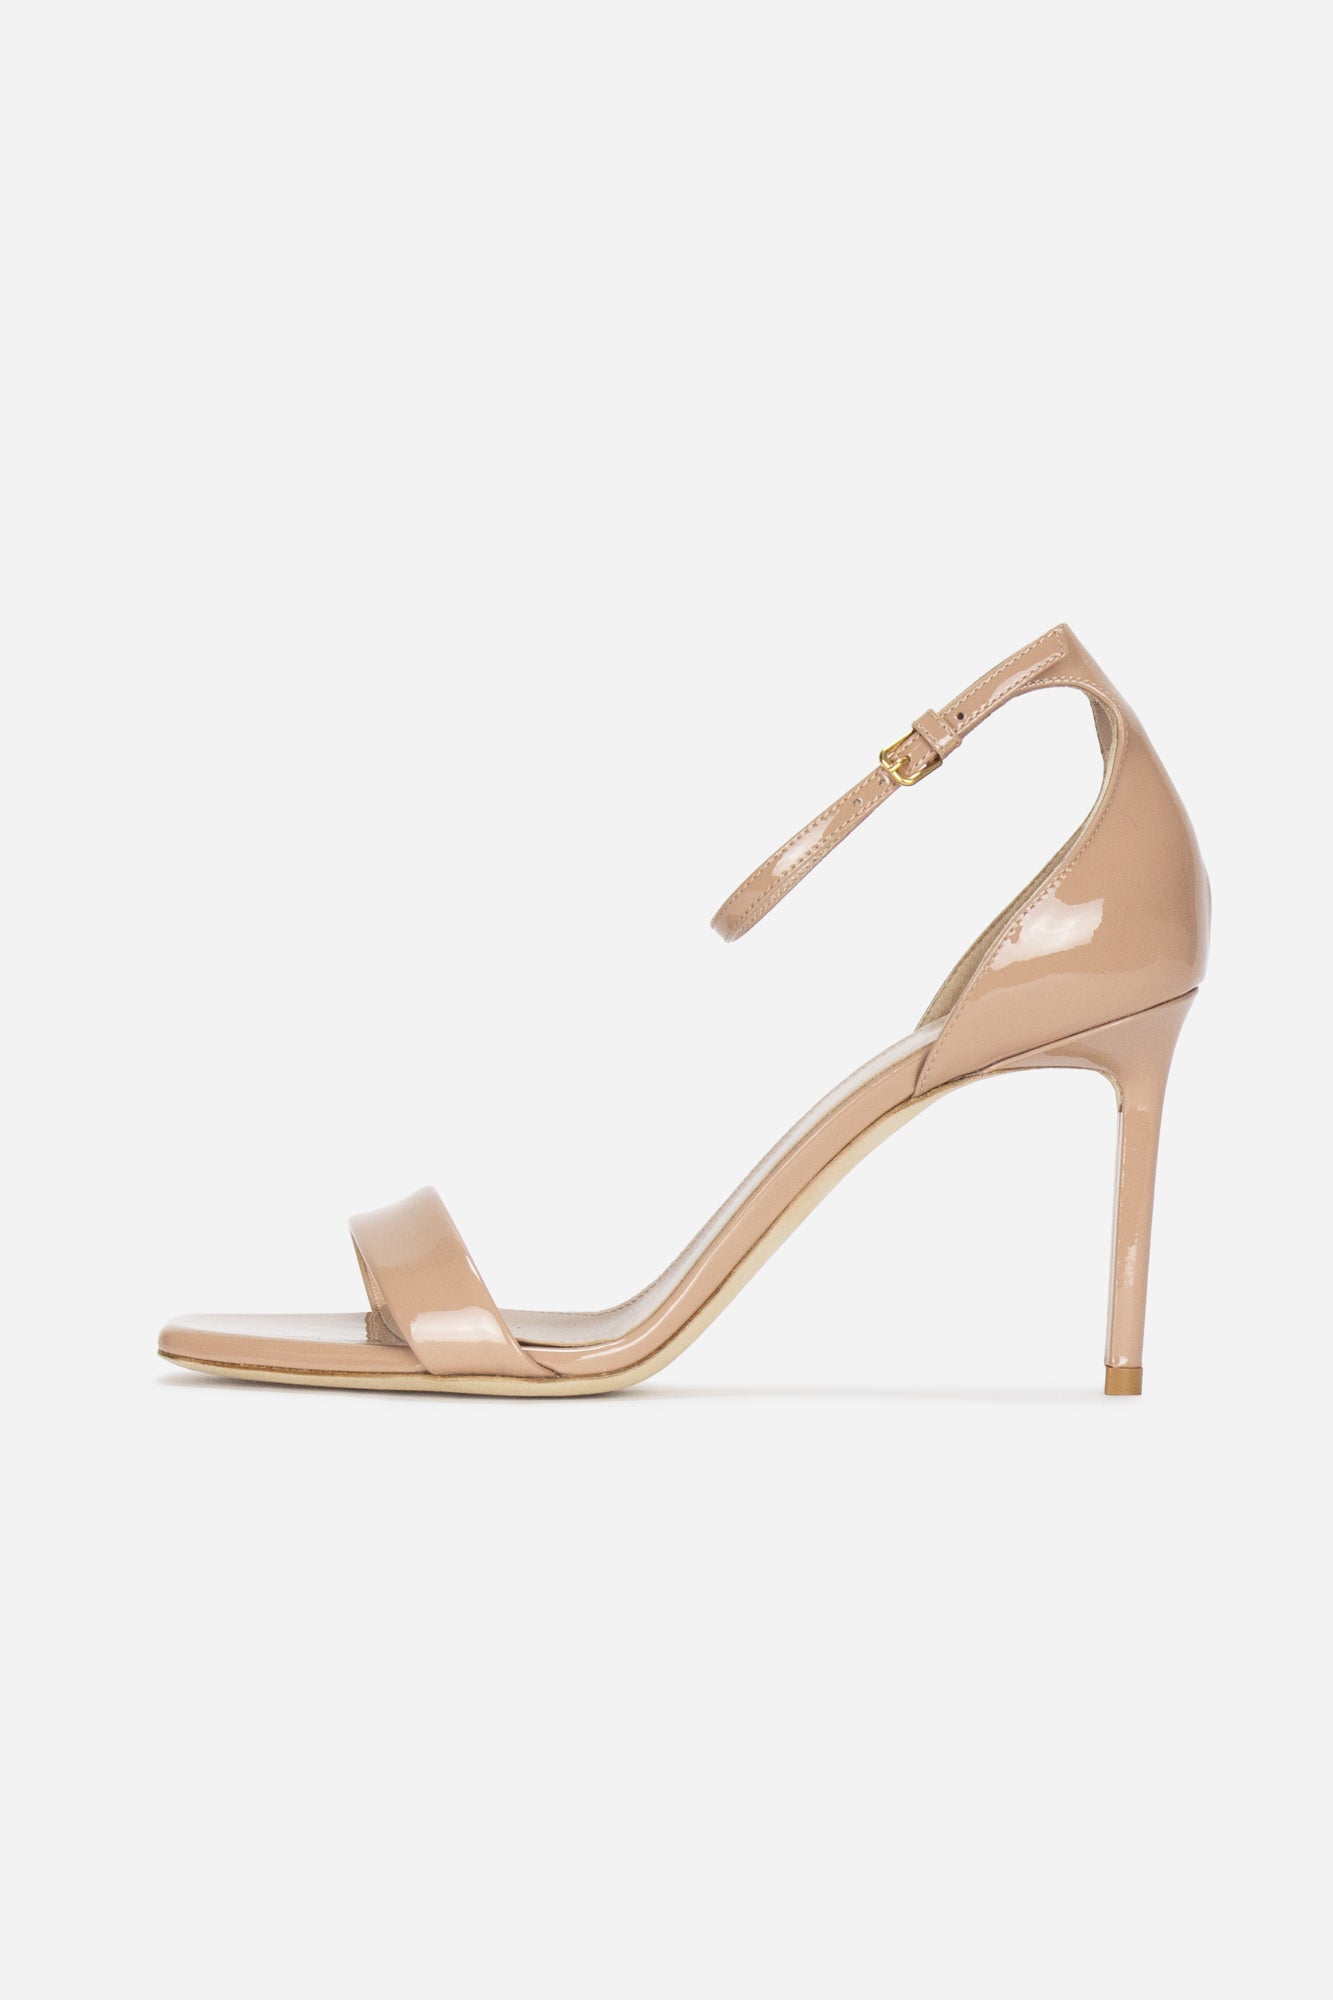 Nude Patent Leather Amber Heeled Sandals 85mm